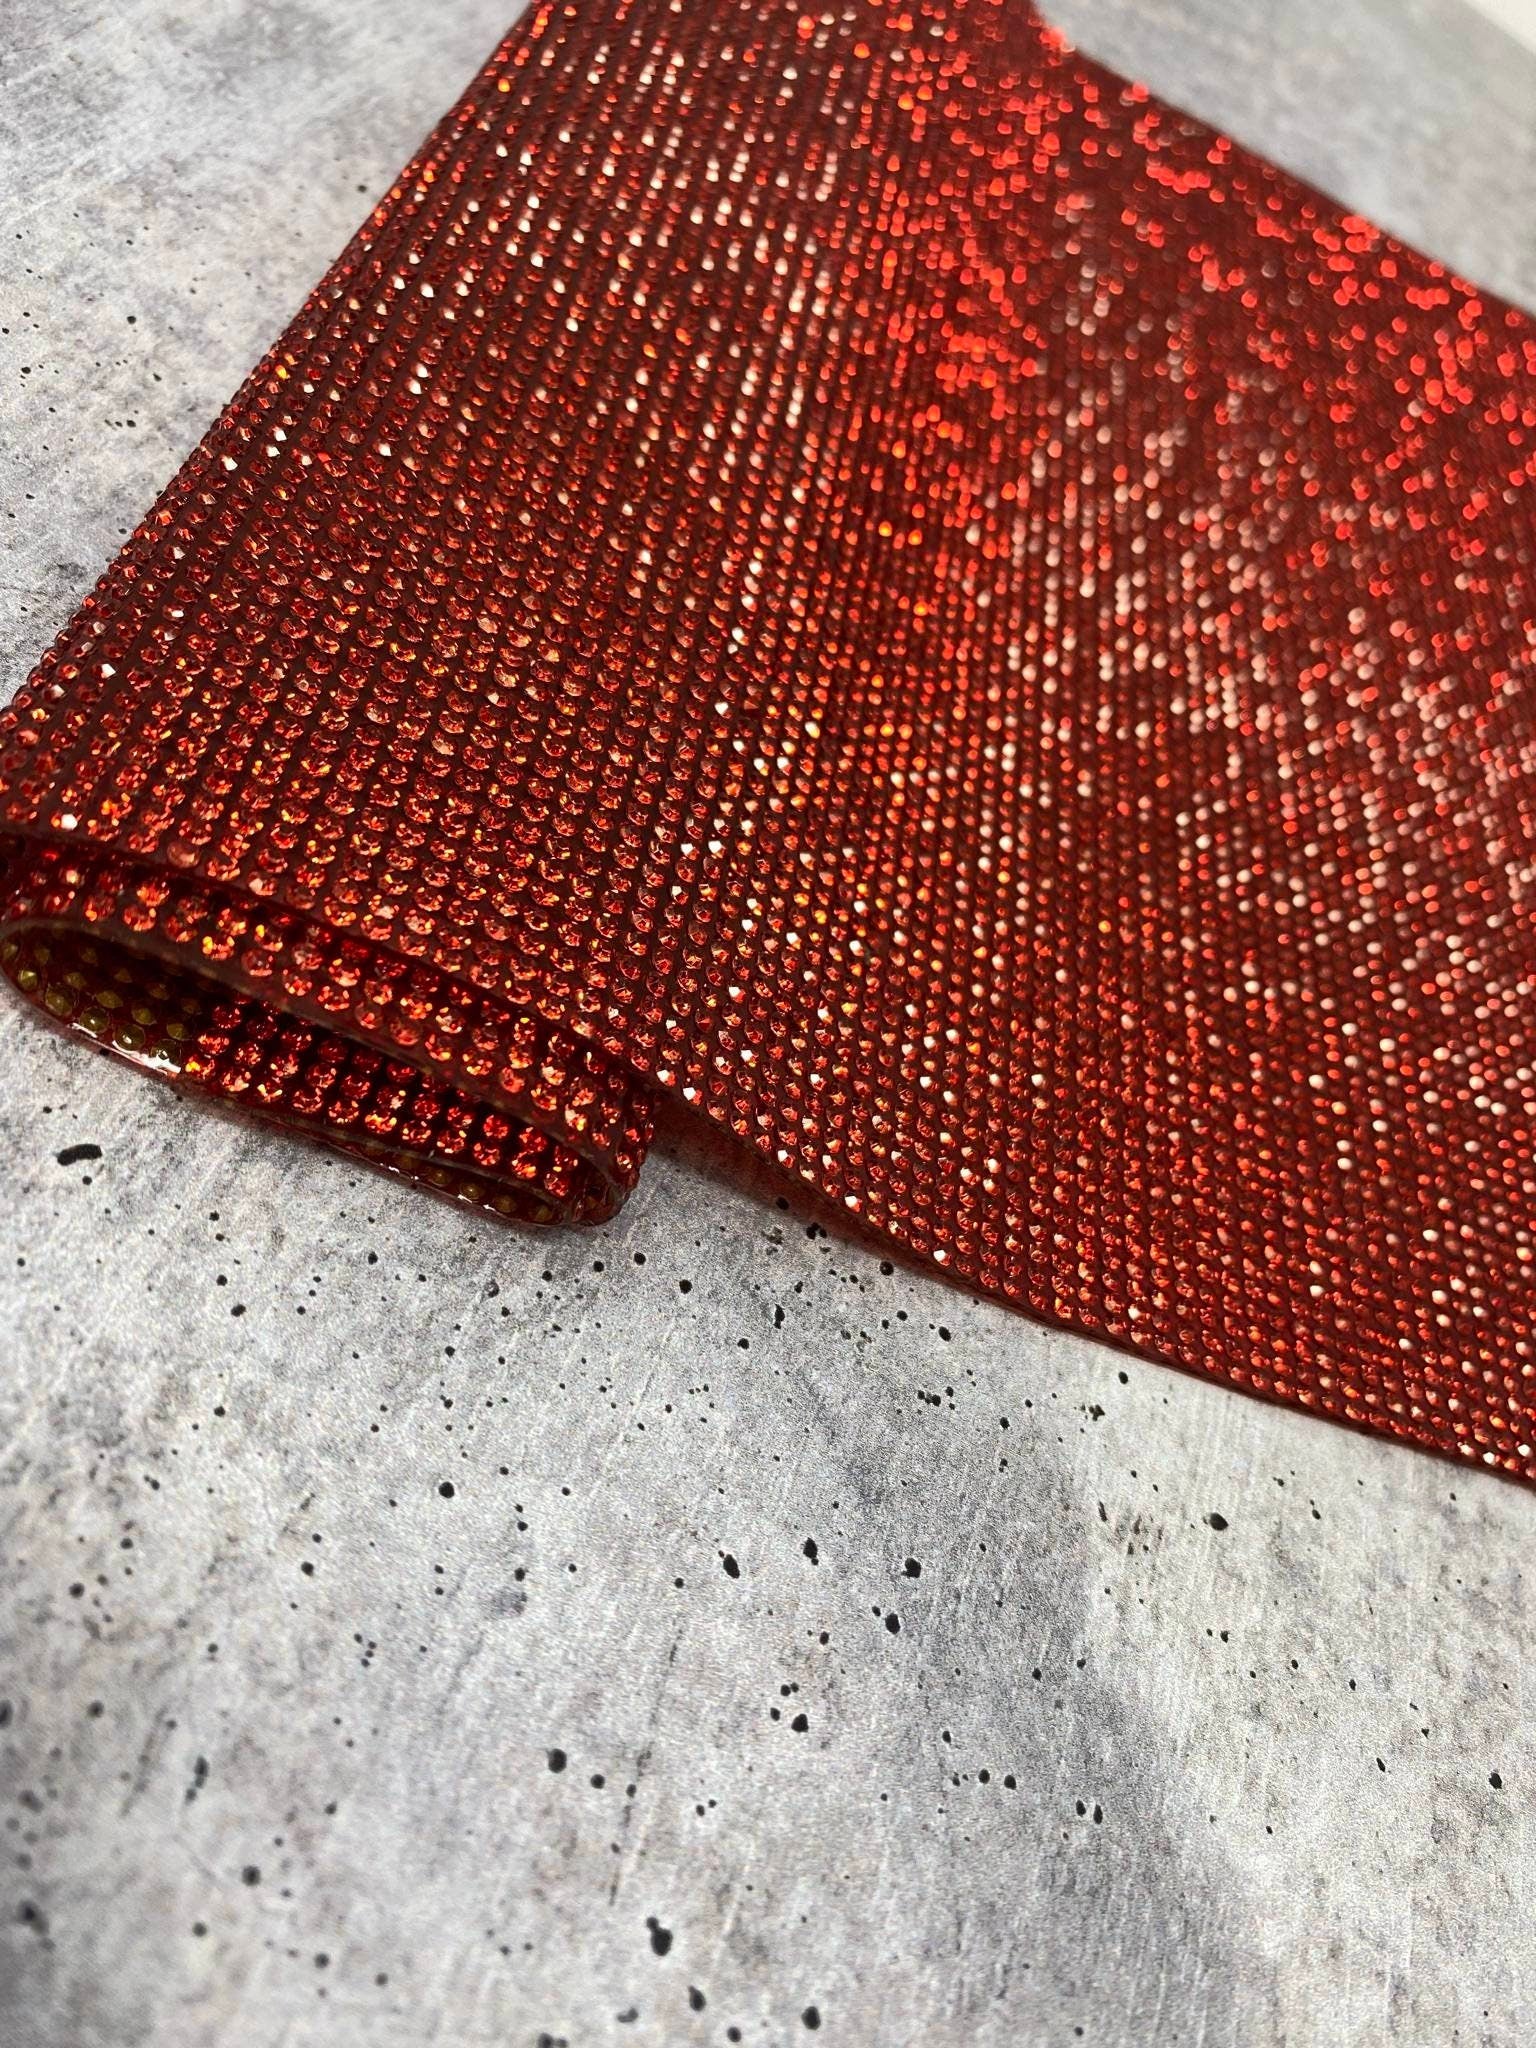 Sparkling RED,Hot-fix Rhinestone Sheet for Blinging Clothes, Shoes, Handbags, Mugs,  & More, 10" x 16.5" sz, 18,000 Stones, Iron-on